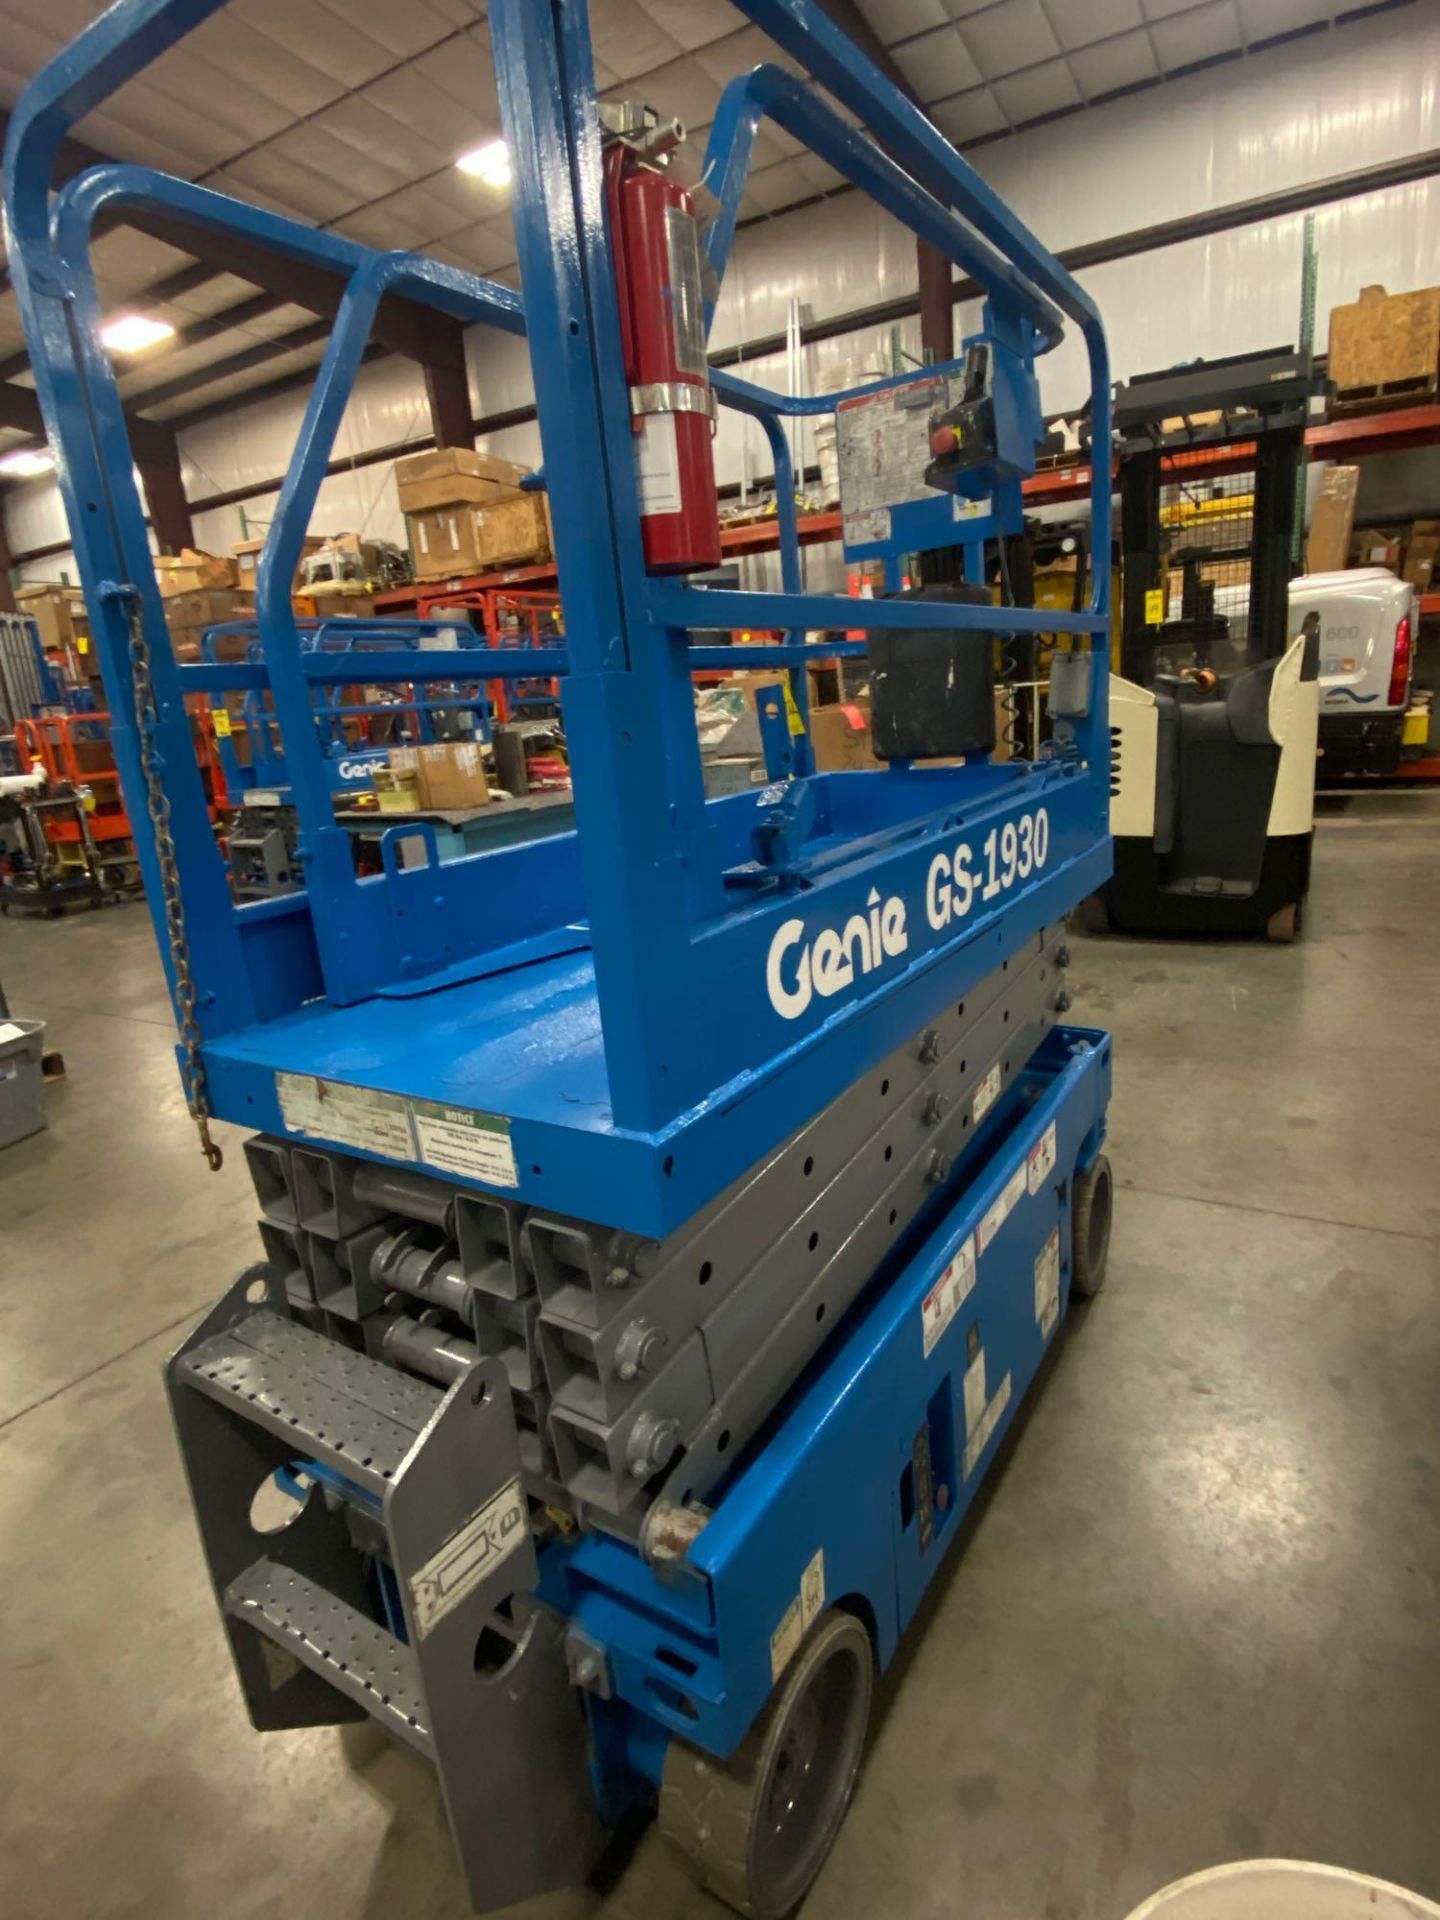 GENIE GS1930 SCISSOR LIFT, SELF PROPELLED, 19' PLATFORM HEIGHT, BUILT IN BATTERY CHARGER, SLIDE OUT - Image 4 of 12